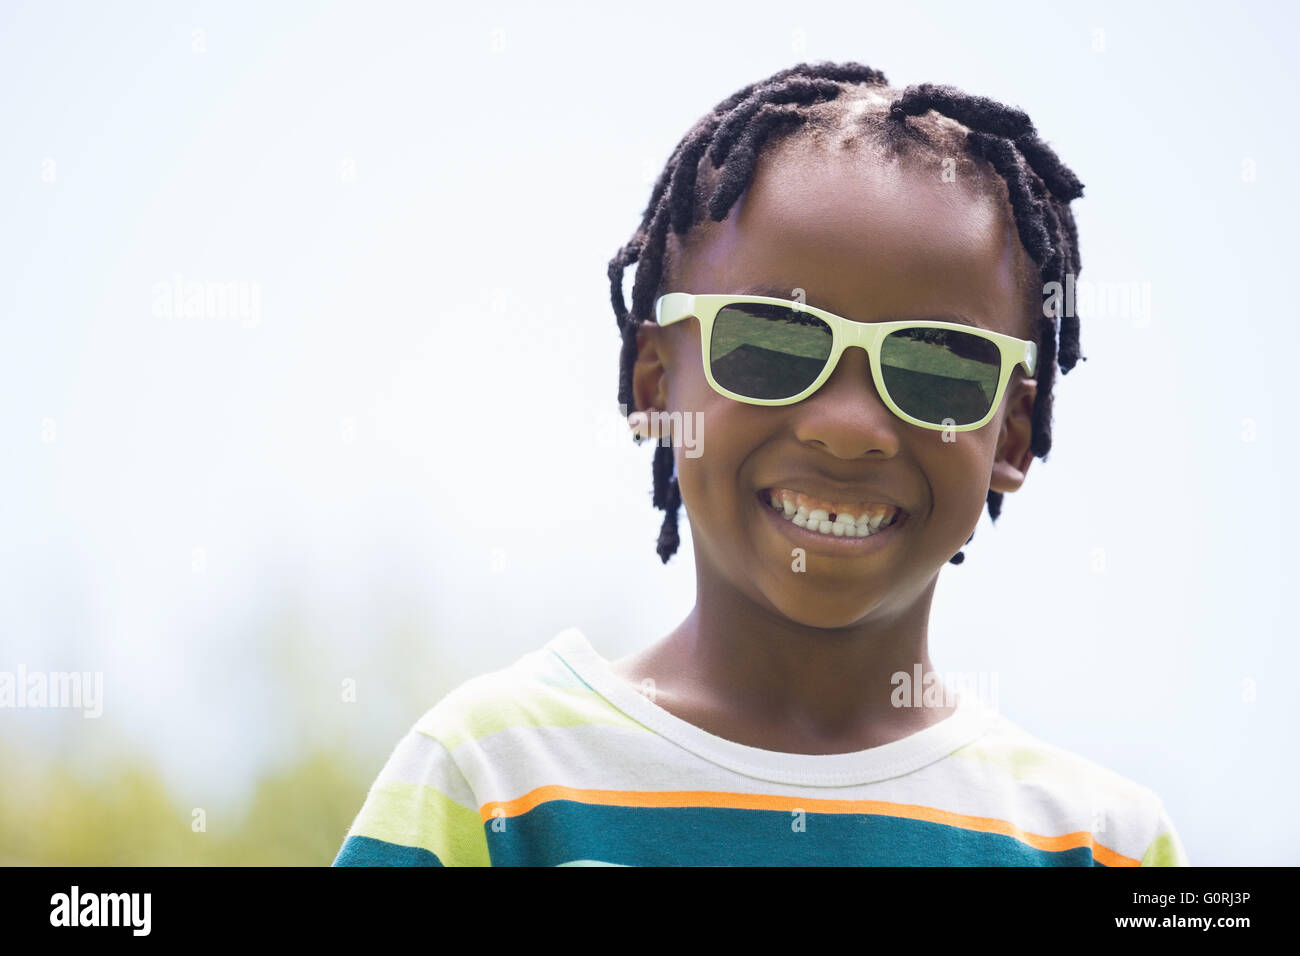 A kid with sunglasses smiling Stock Photo